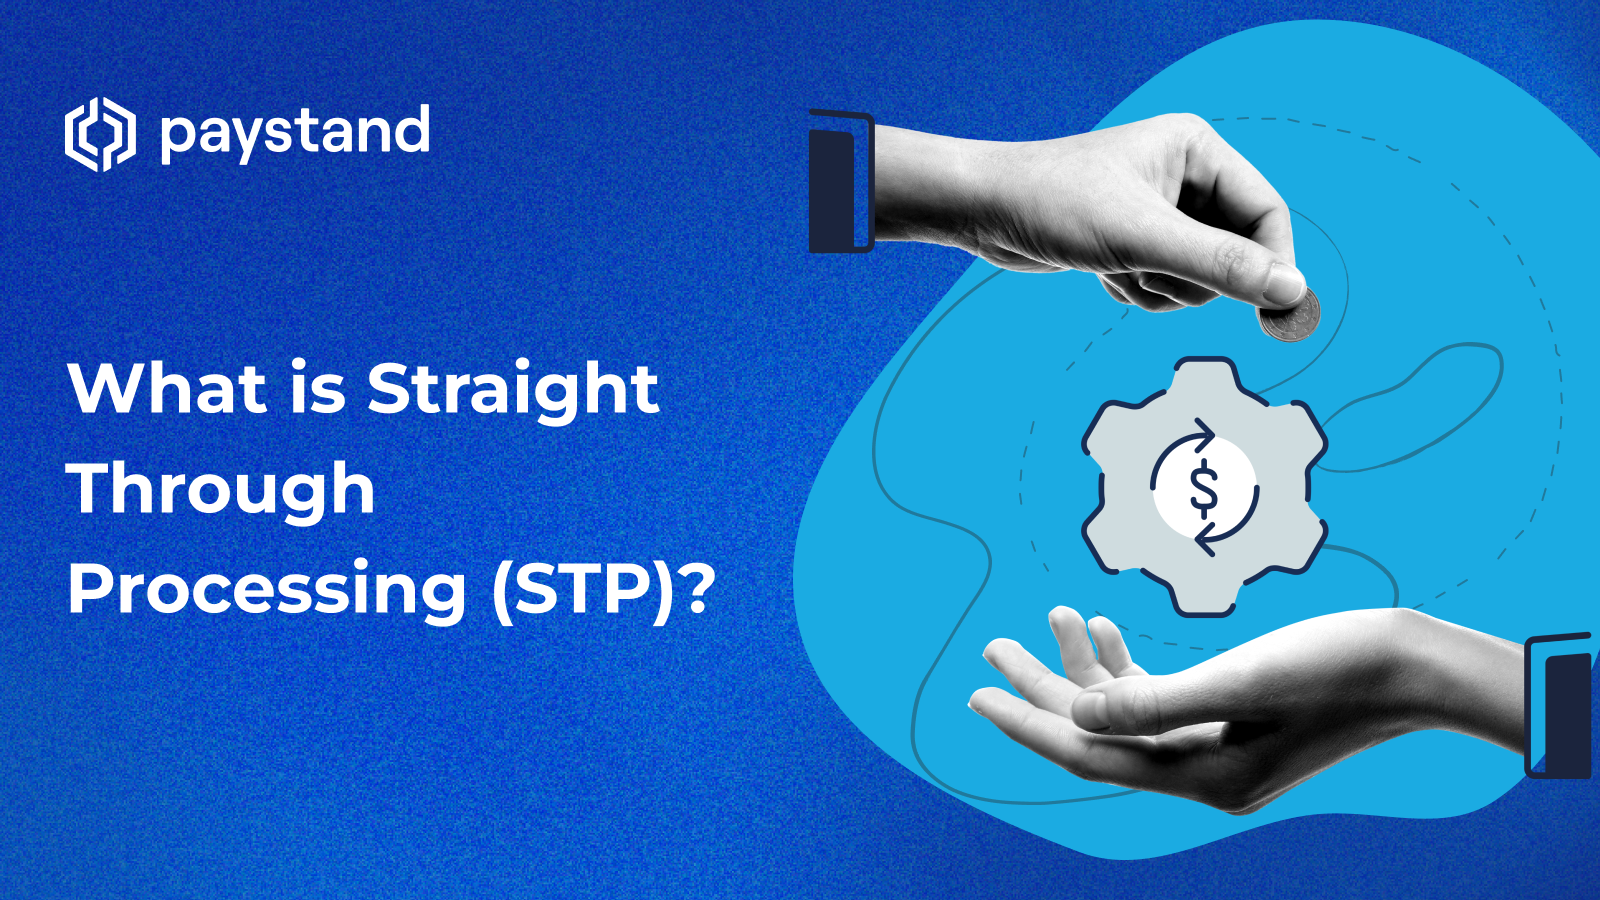 What is Straight Through Processing (STP)?